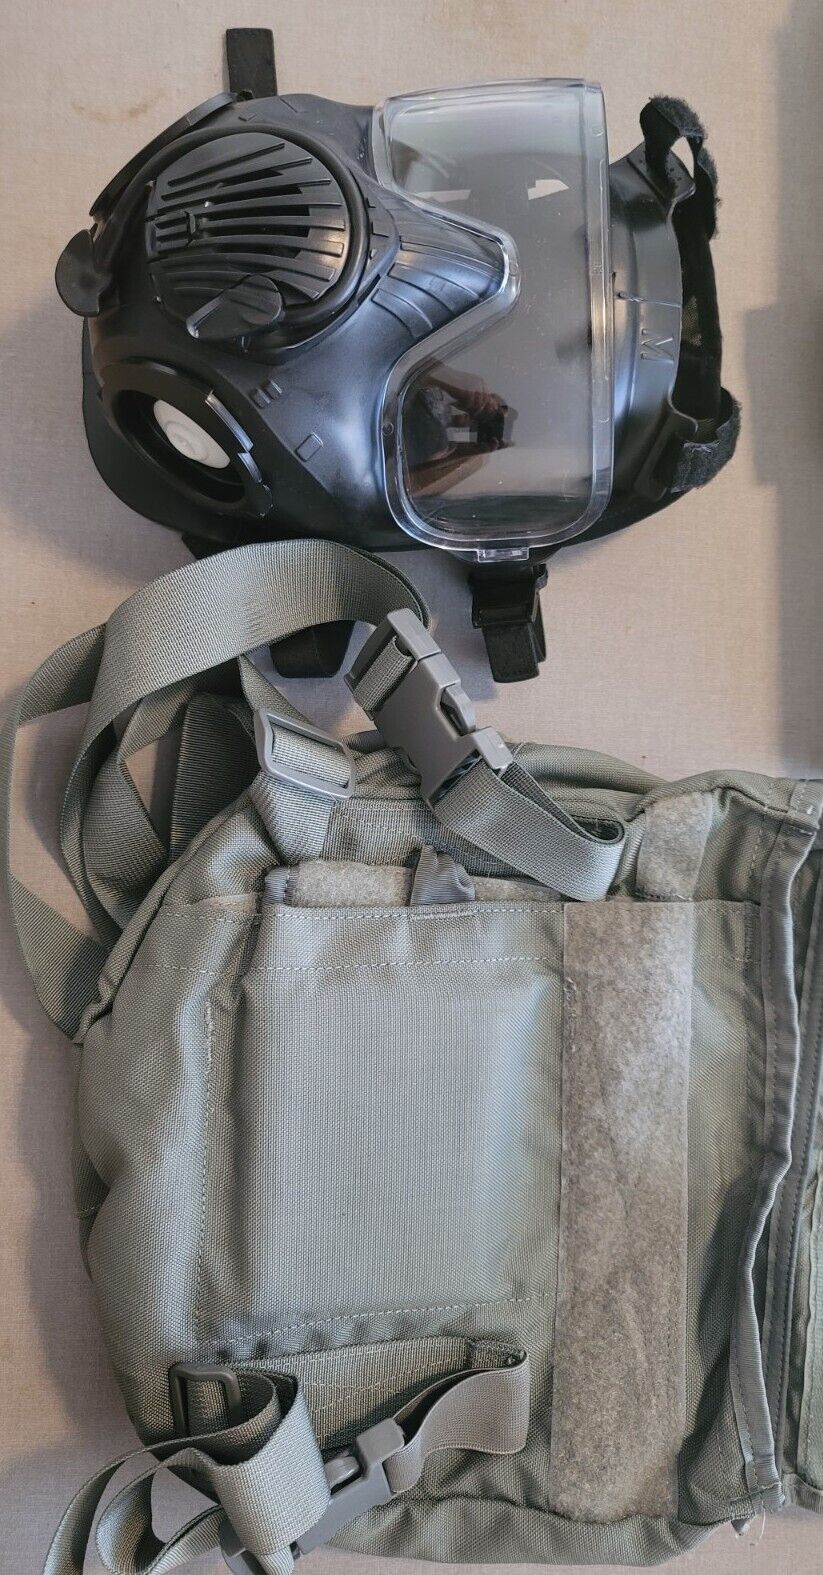 Avon M50 Military Gas Mask - Size MEDIUM WITH BAG CARRIER - ** NO FILTERS**